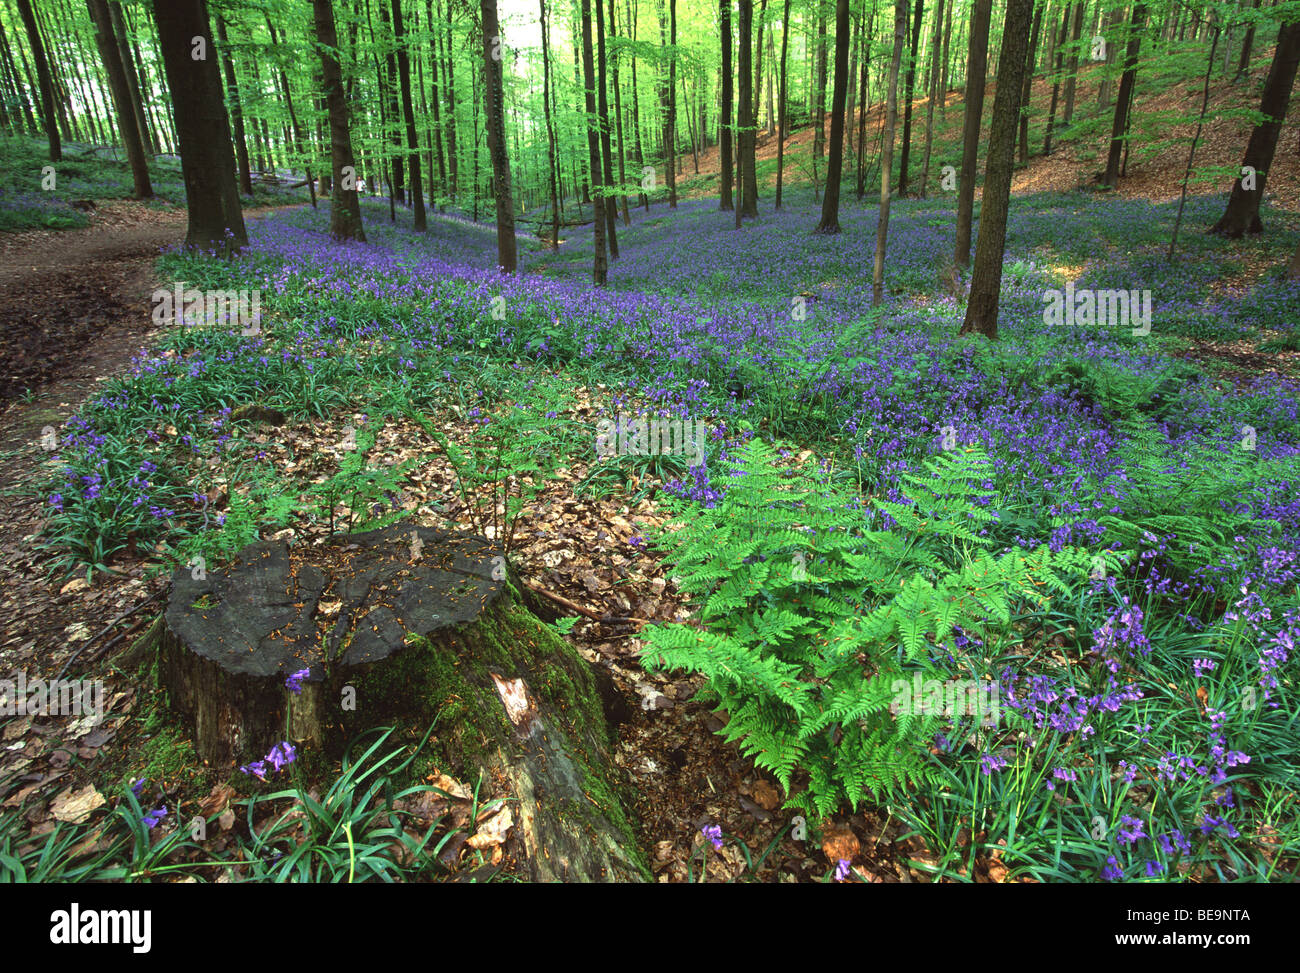 Bluebells (Endymion nonscriptus) and broad buckler fern (Dryopteris dilatata) in beech forest. Stock Photo